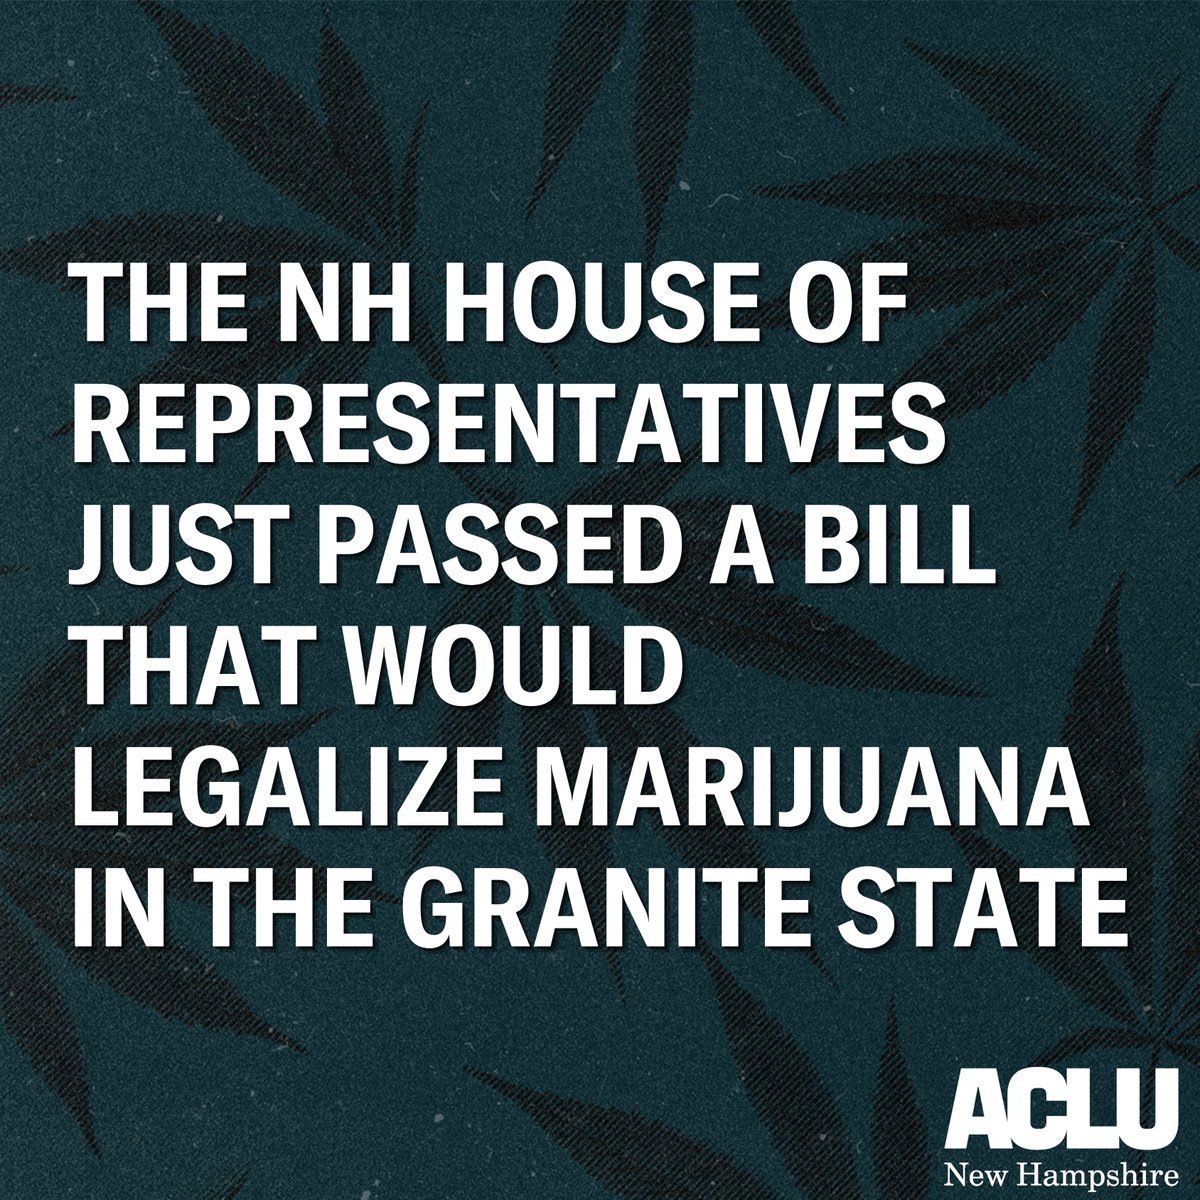 BREAKING: The NH House just passed HB 1633, which would legalize marijuana in the Granite State. It’s time to stop kicking the can down the road and wasting NH taxpayer dollars on the failed war on drugs, this is the year that we legalize marijuana in New Hampshire. #nhpolitics